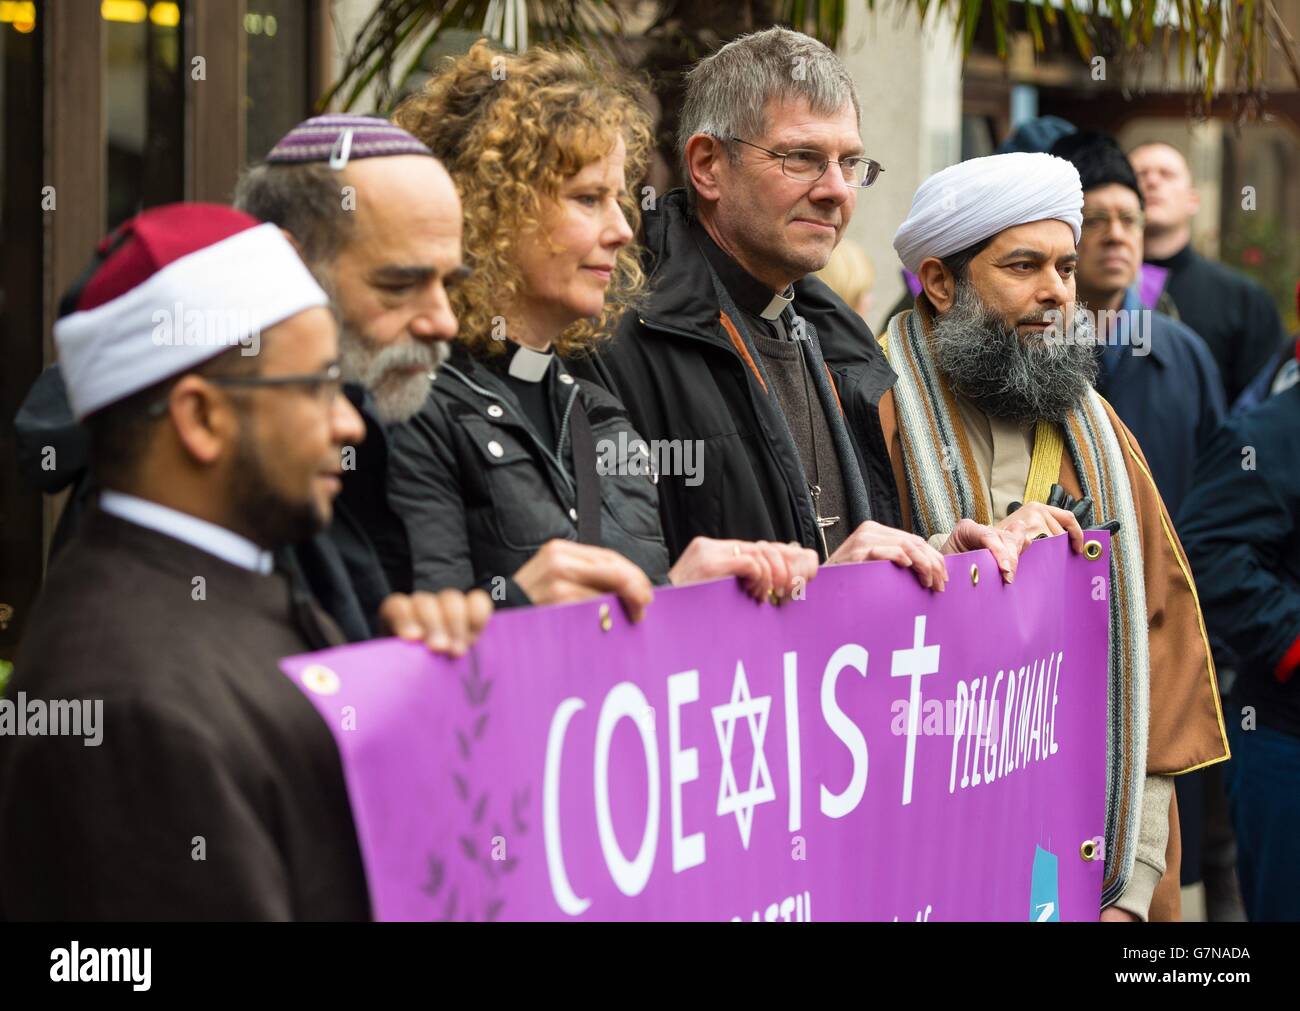 (left to right) Imam Sheikh Khalifa Ezzat, Rabbi Jonathan Wittenberg, Rev. Margaret Cave, Dean of Coventry John Witcombe and Assistant Secretary General of the Muslim Association of Great Britain Ibrahim Mogra at the start of the Coexist march at the London Central Mosque in Regent's Park, London. Stock Photo